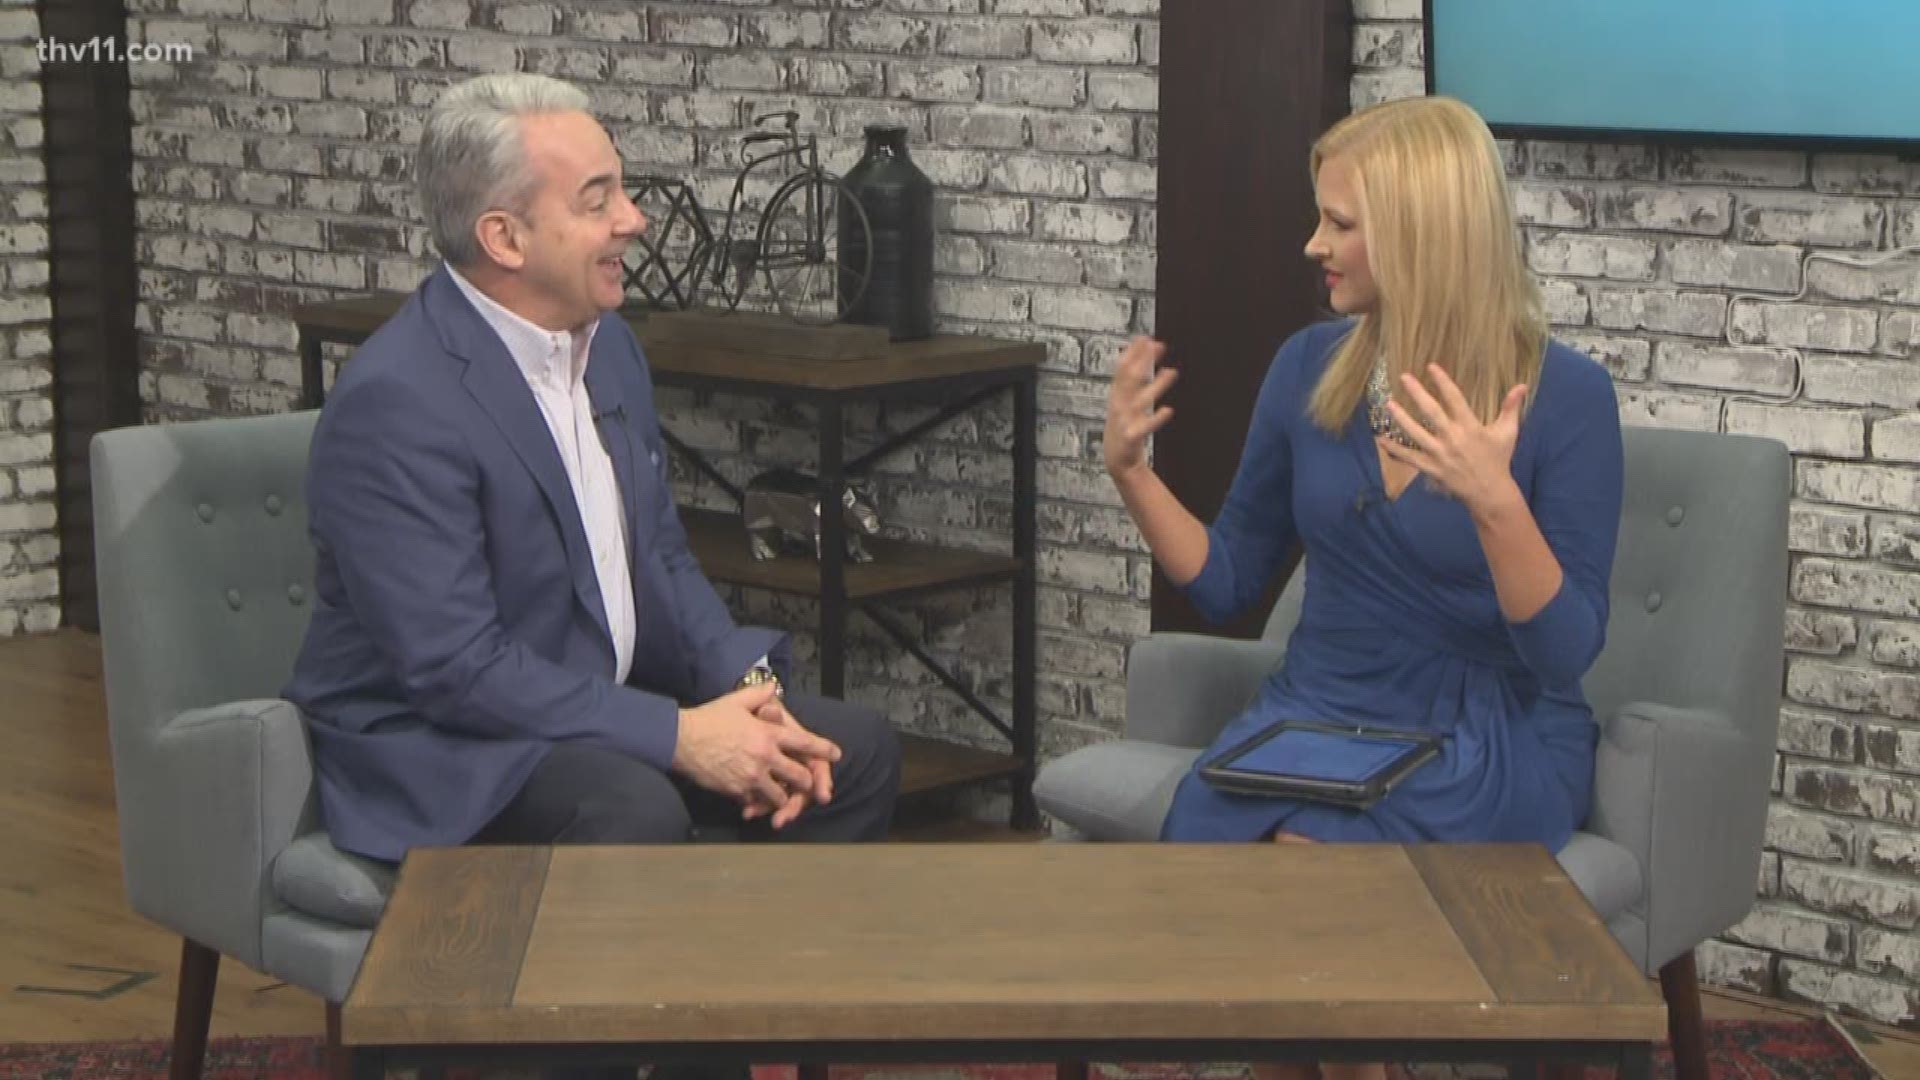 Eric Hutchinson shares some tips to keep your finances in good shape.